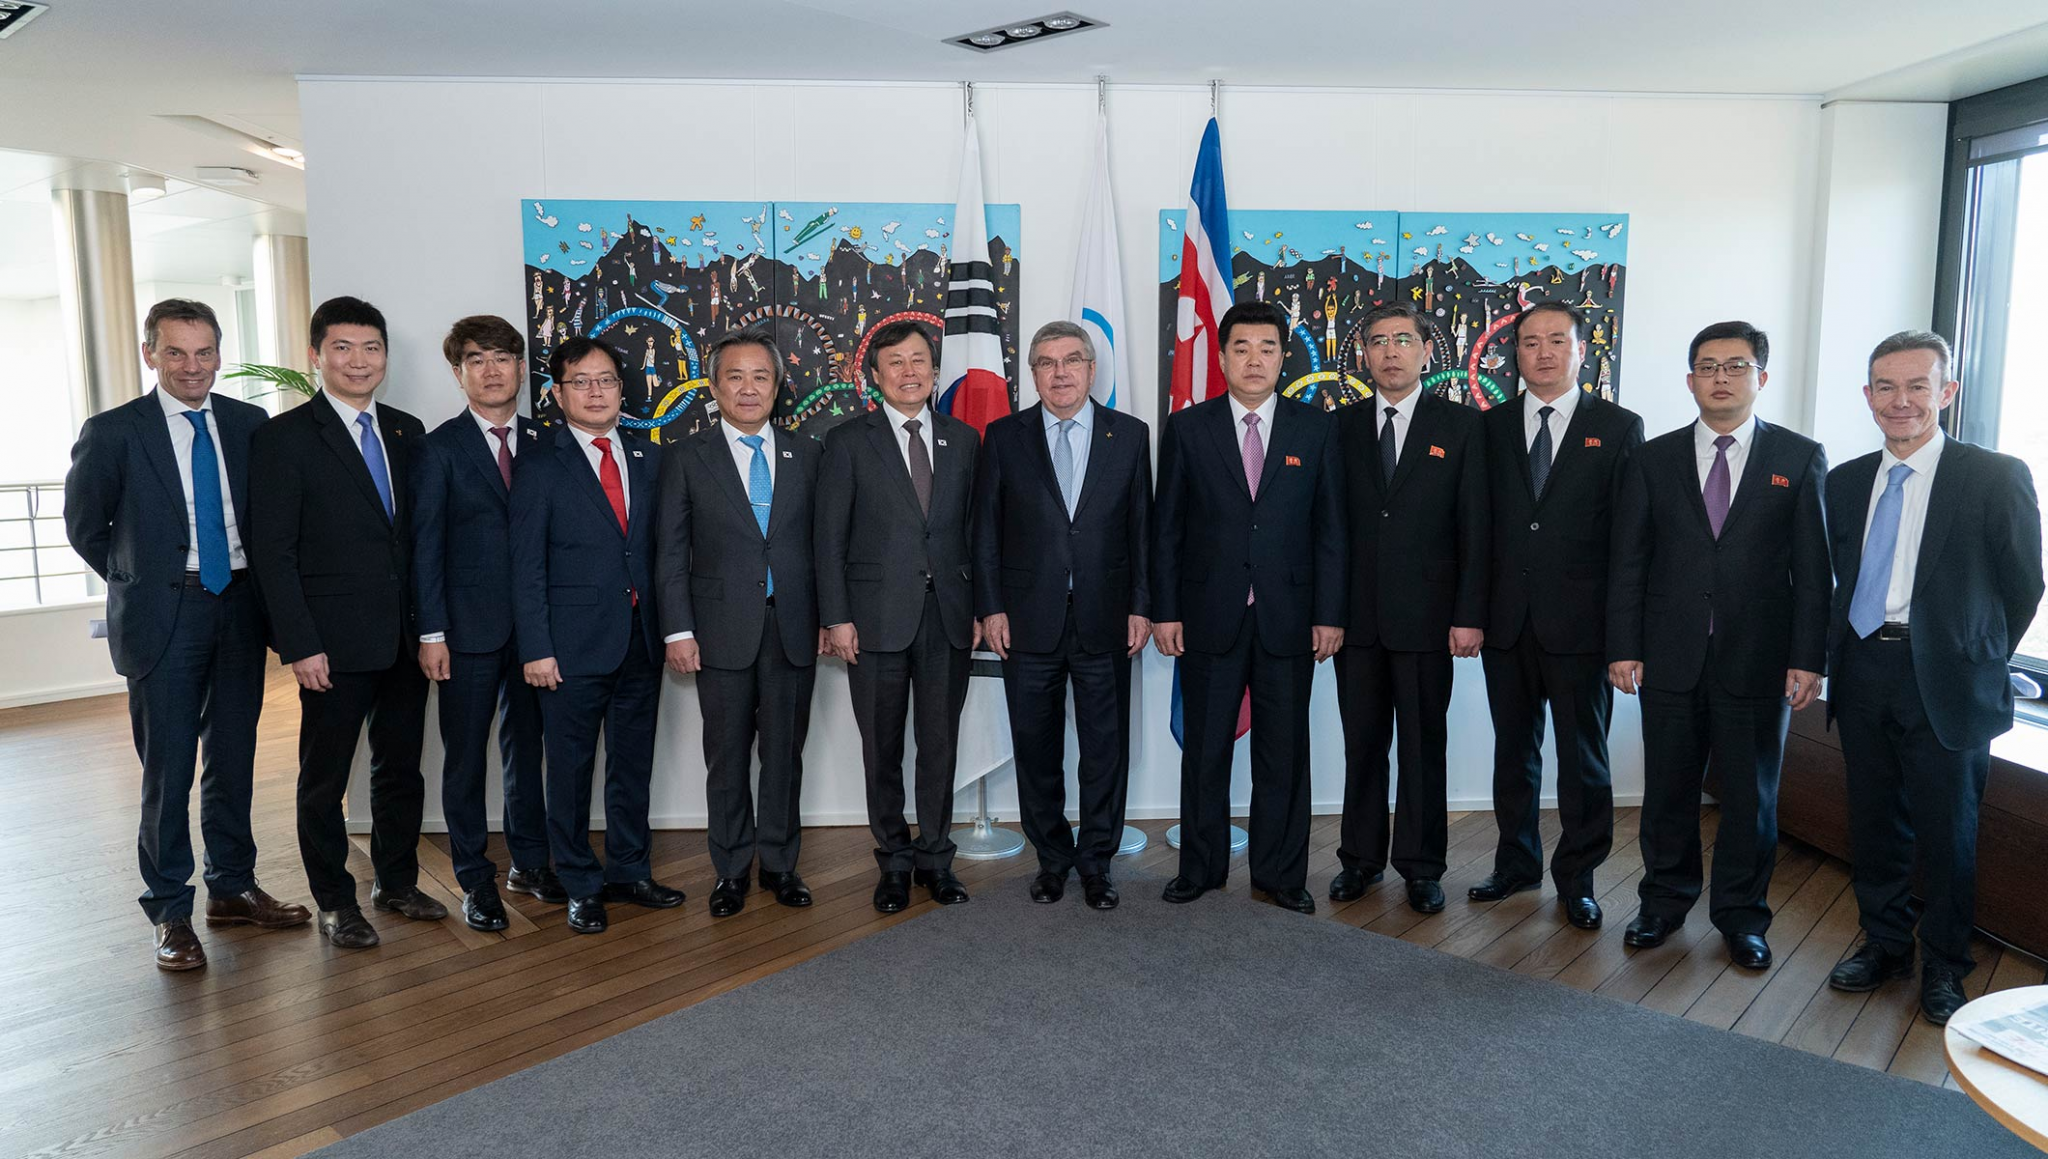 Bach welcomes "historic initiative" of joint Korean bid for 2032 Olympic Games as unified teams at Tokyo 2020 discussed